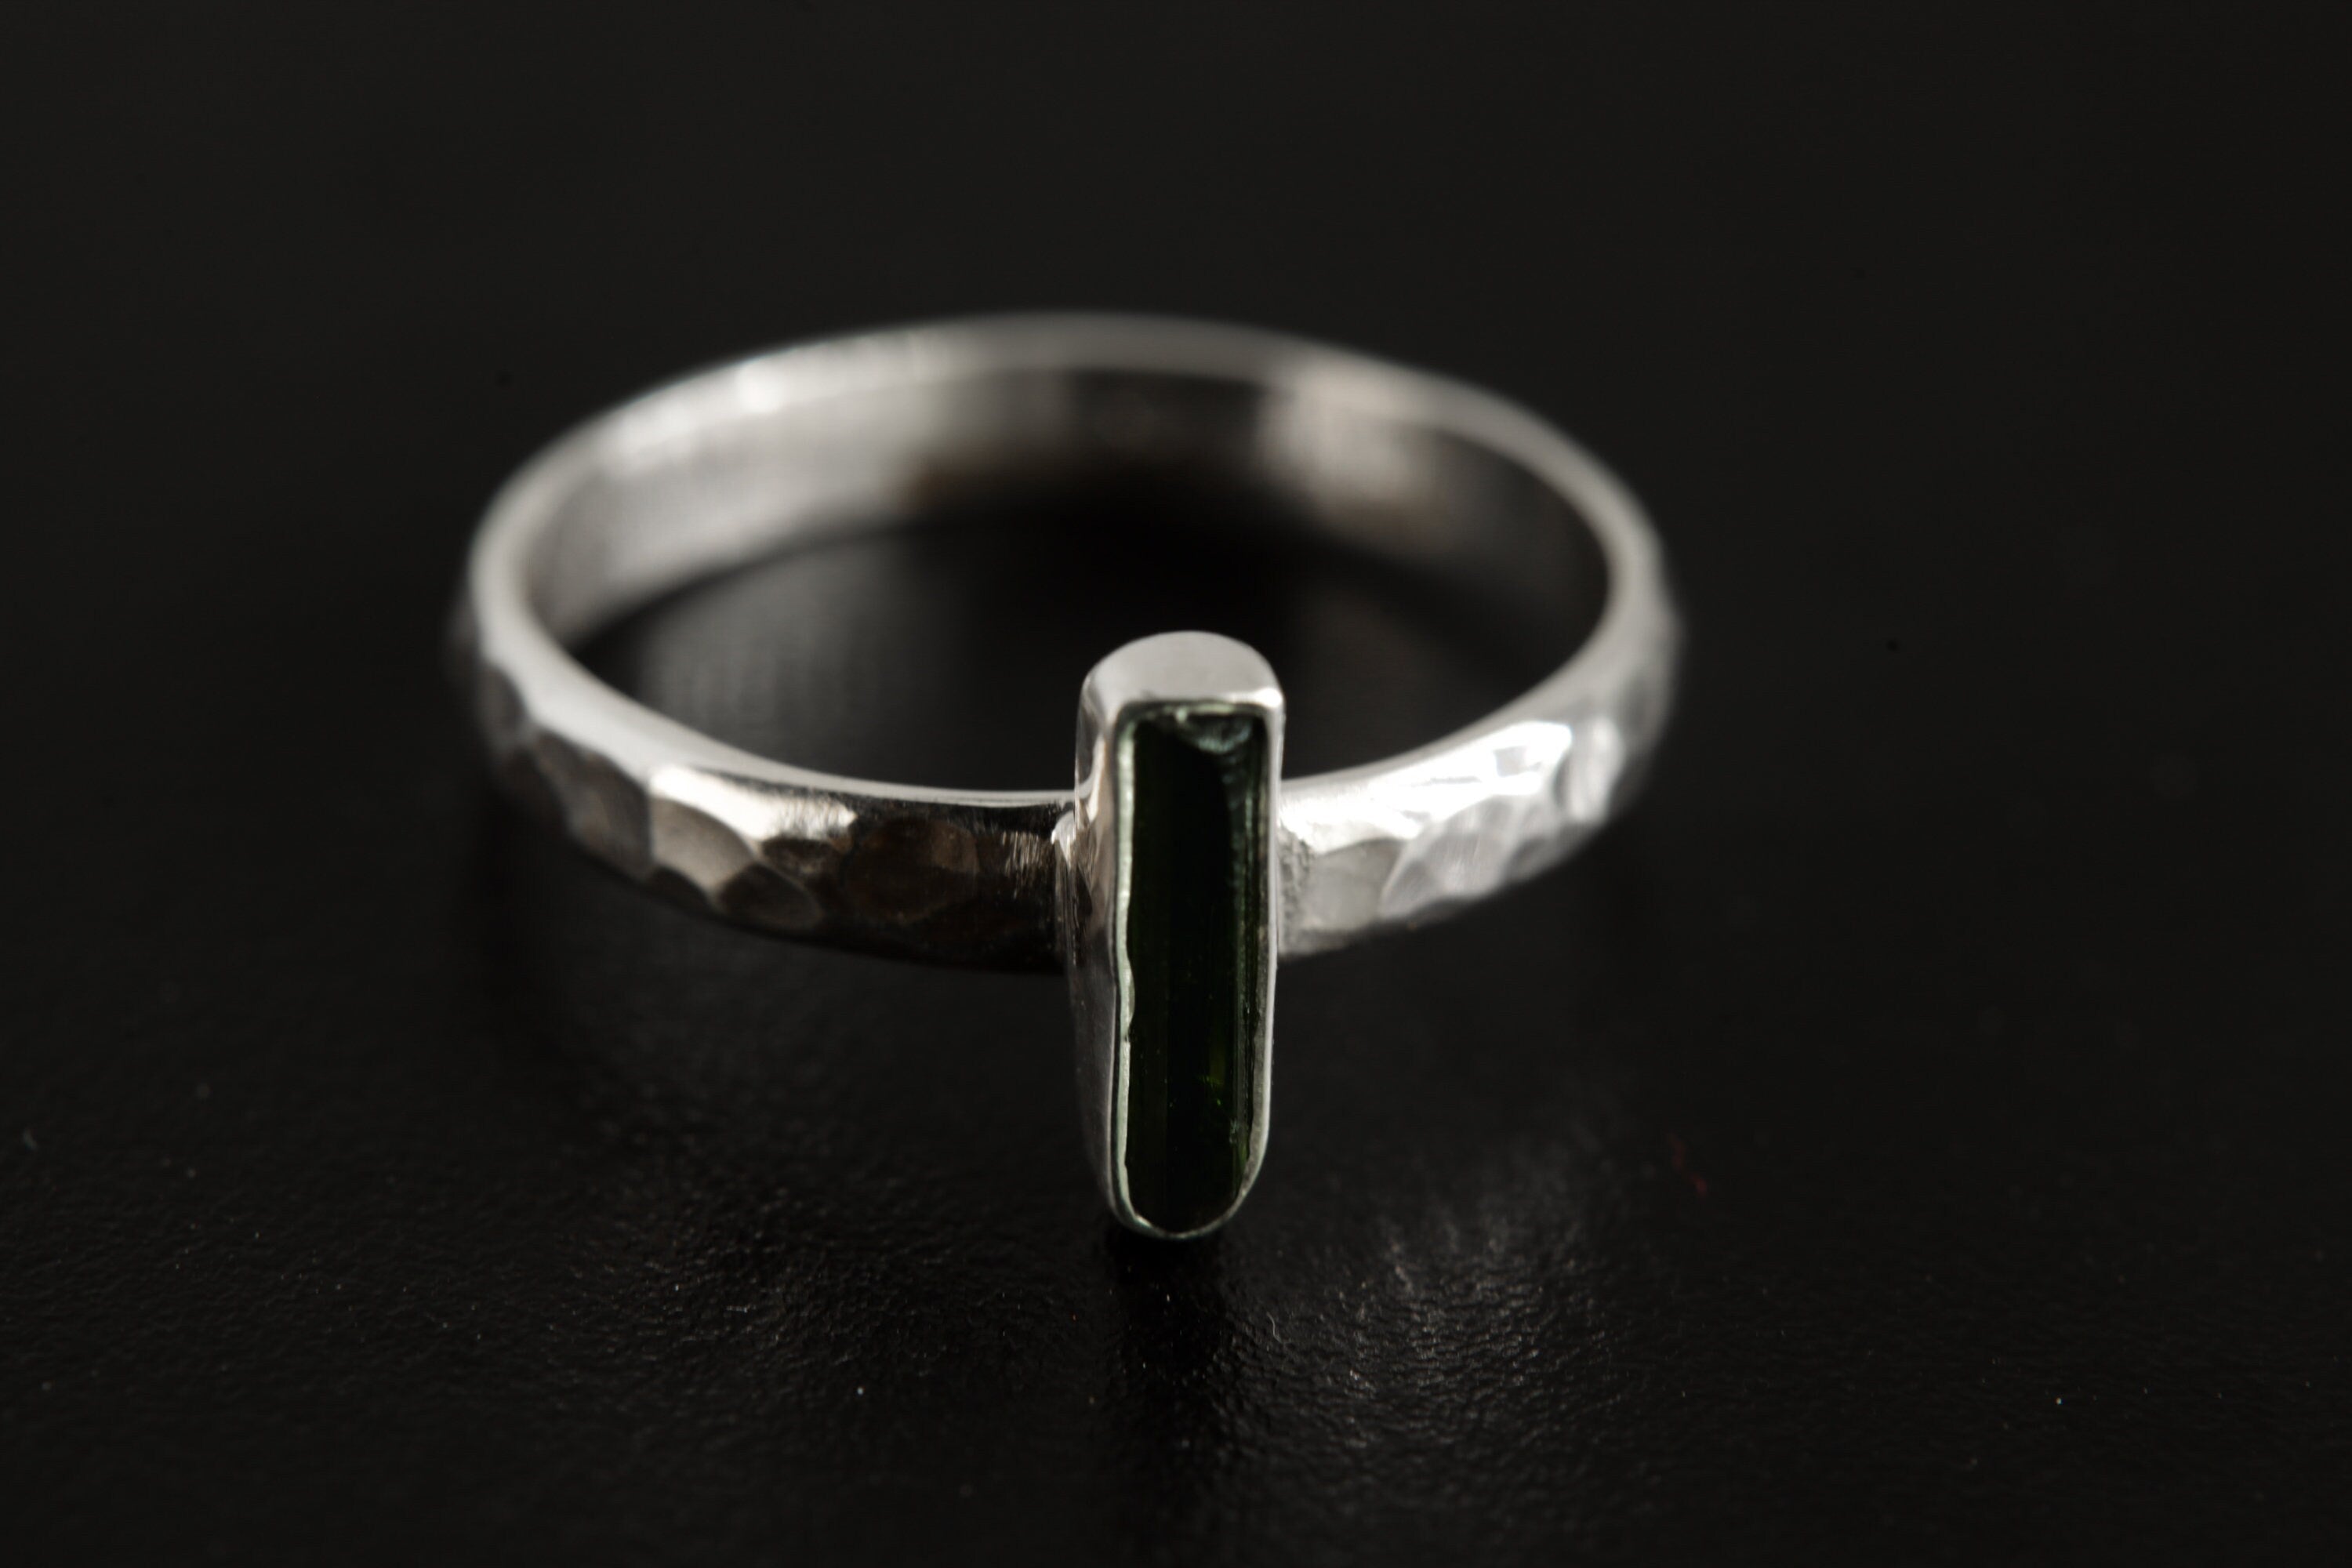 Verdant Touch: Green Tourmaline - Sterling Silver Ring - Hammer Textured & Shiny Finish - Size 8 US - NO/05